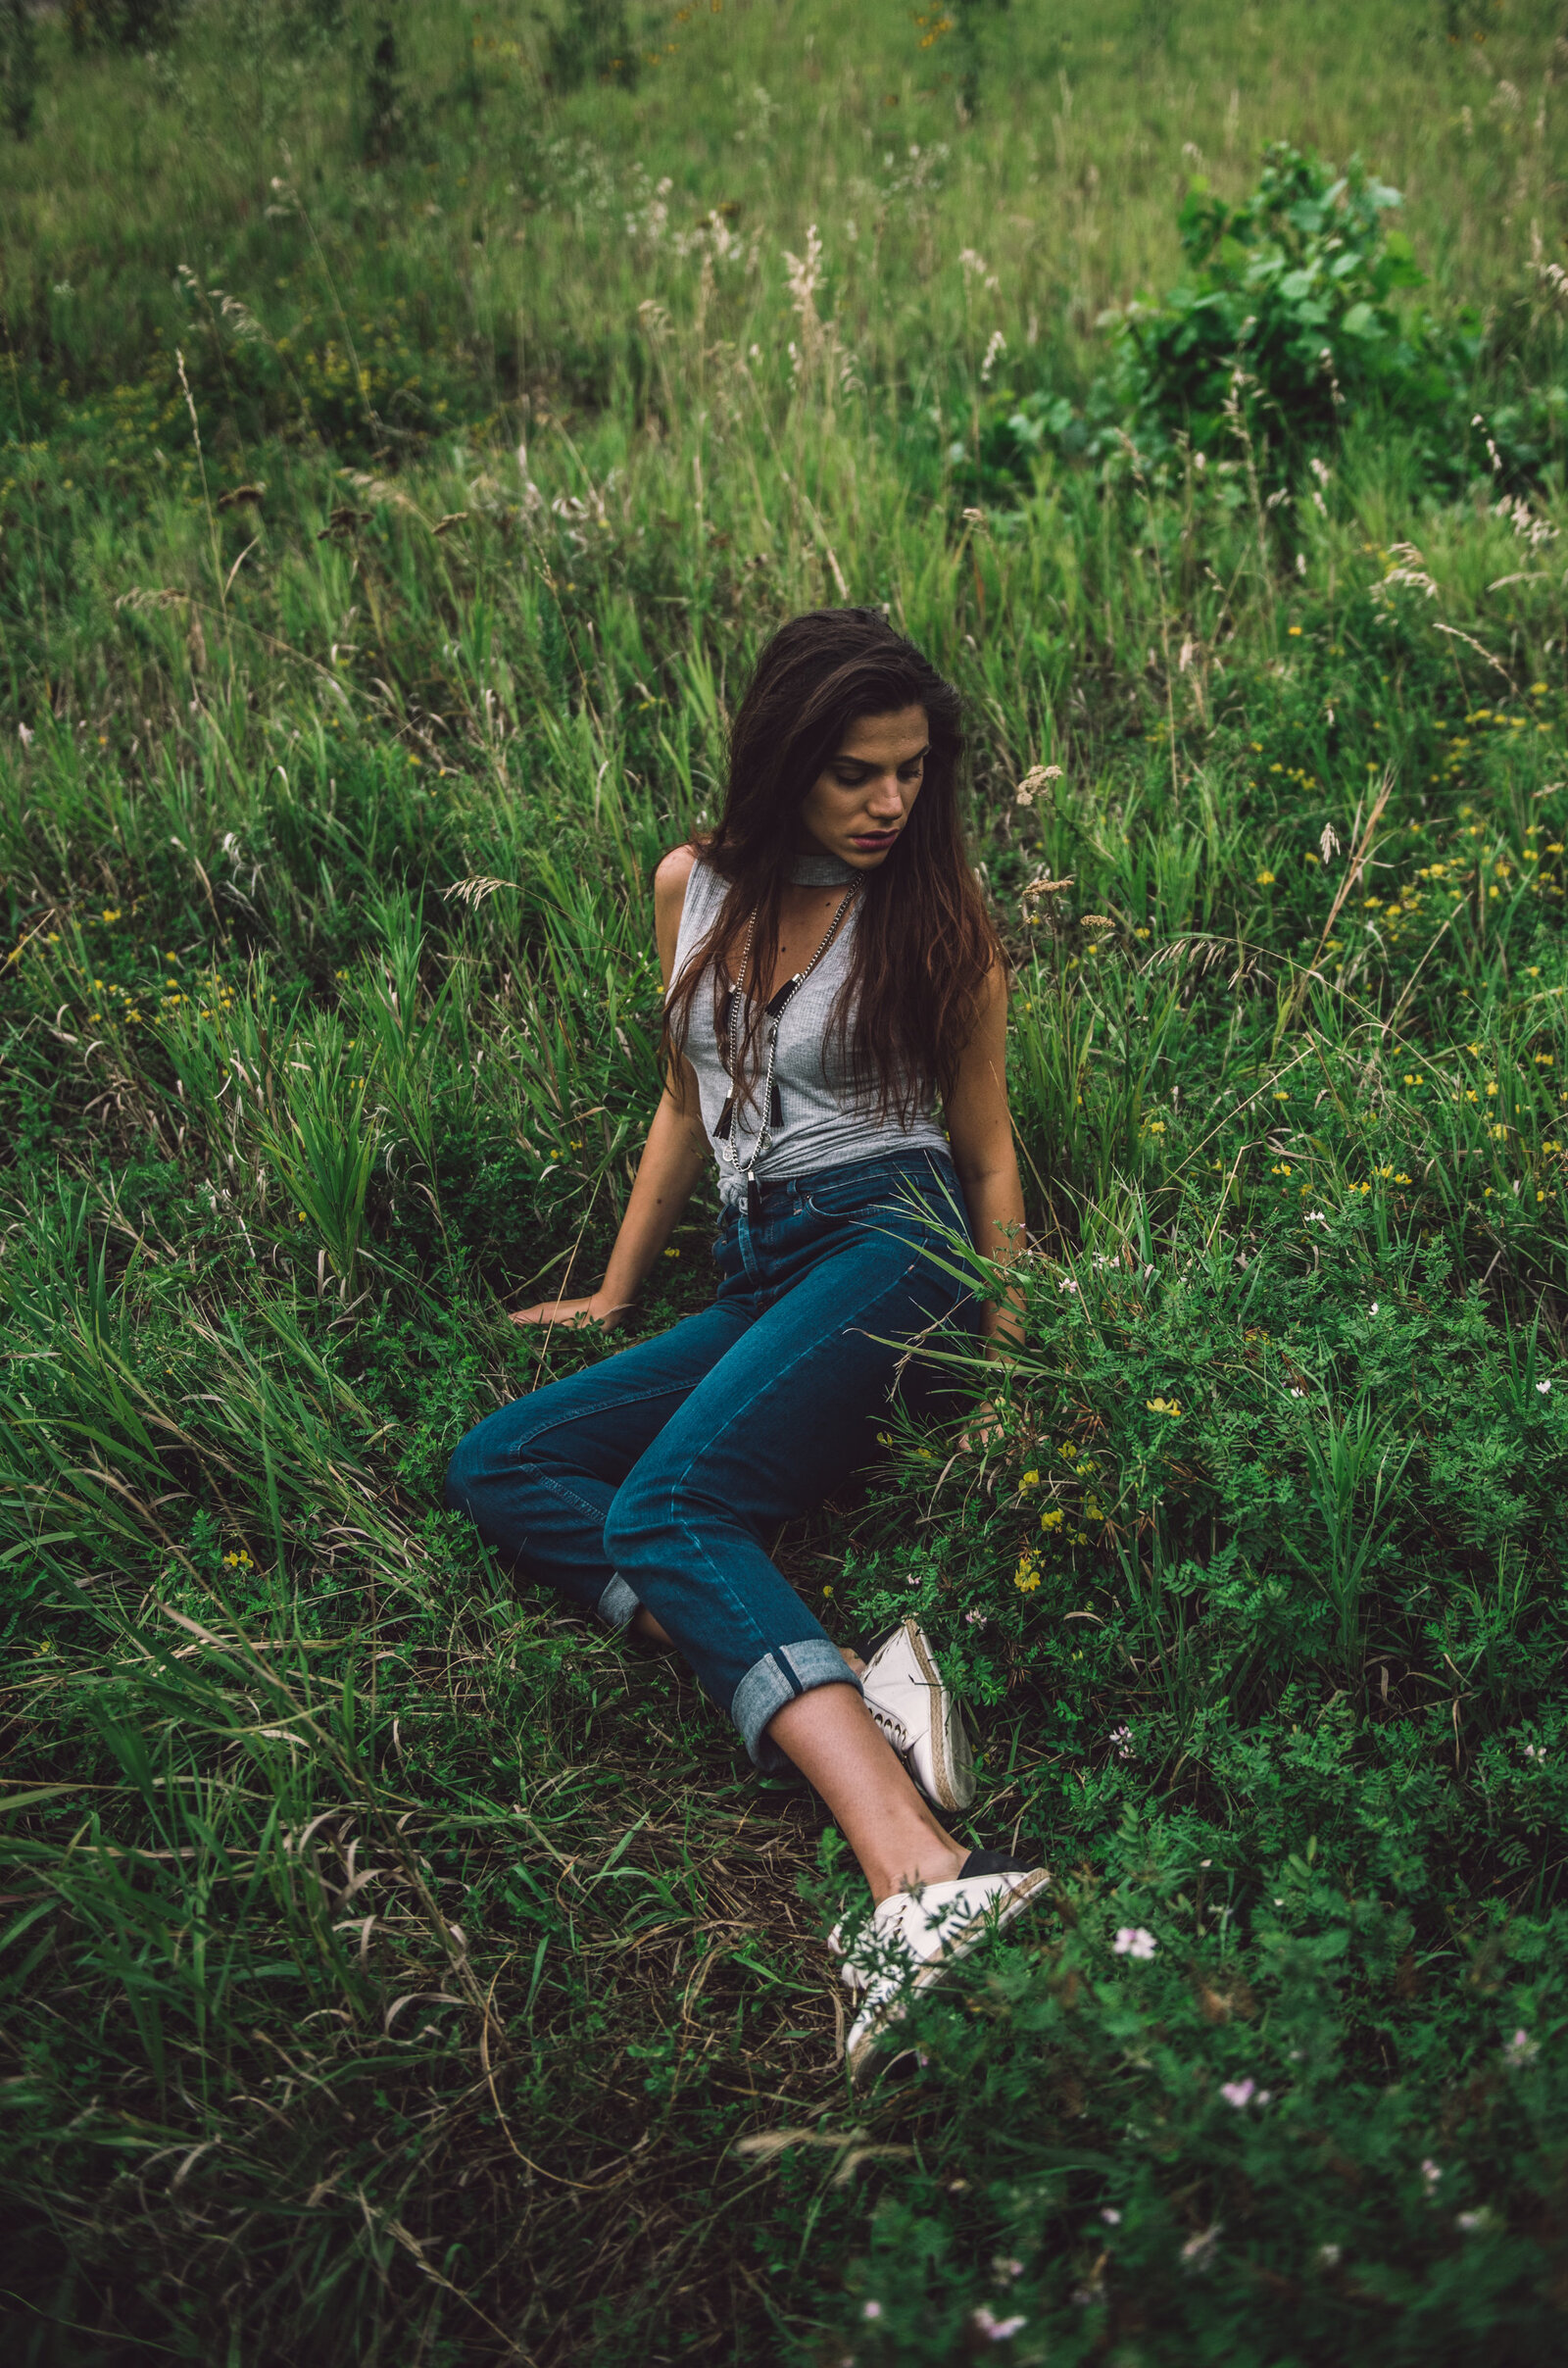 Gril n jeans sitting in grass